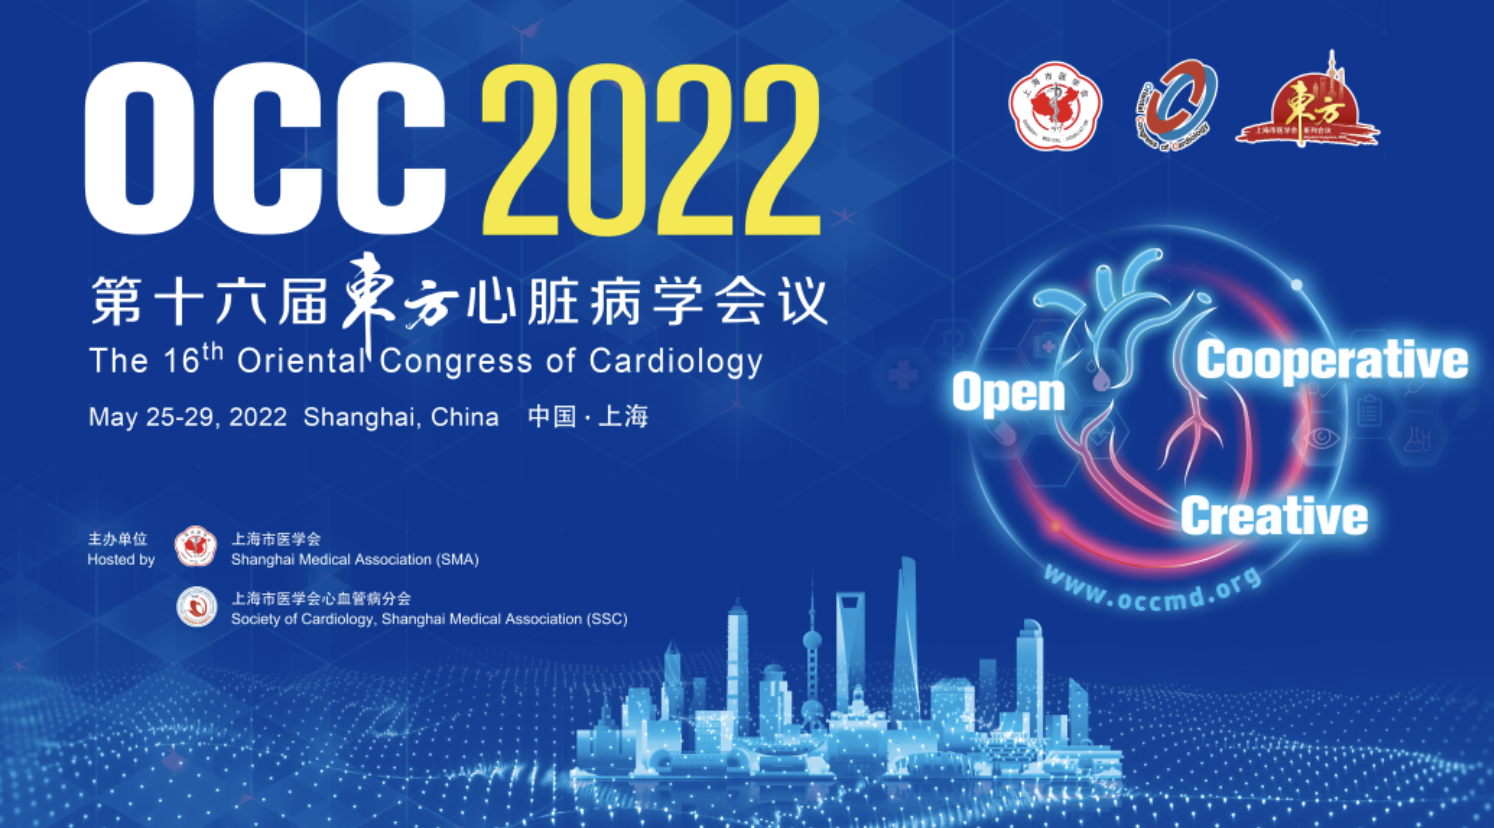 OCC 2022 | <font color="red">PIANO</font><font color="red">评分</font>在急性心肌梗死预后评估和指导急诊PCI术血栓抽吸中的临床价值